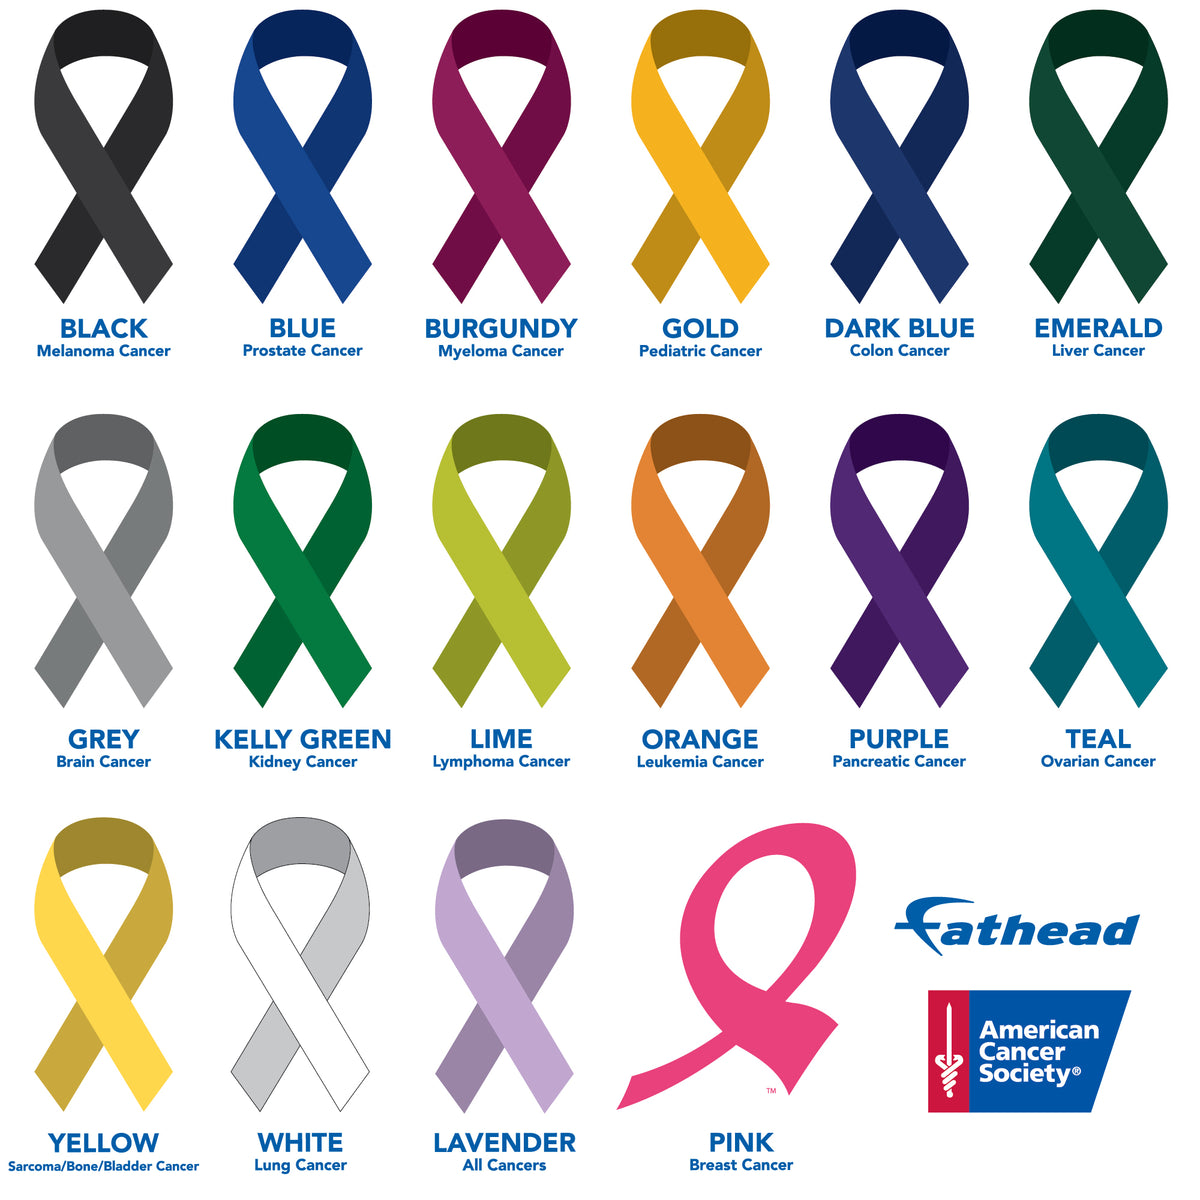 colors-of-cancer-ribbons-american-cancer-society-removable-wall-decal-fathead-llc